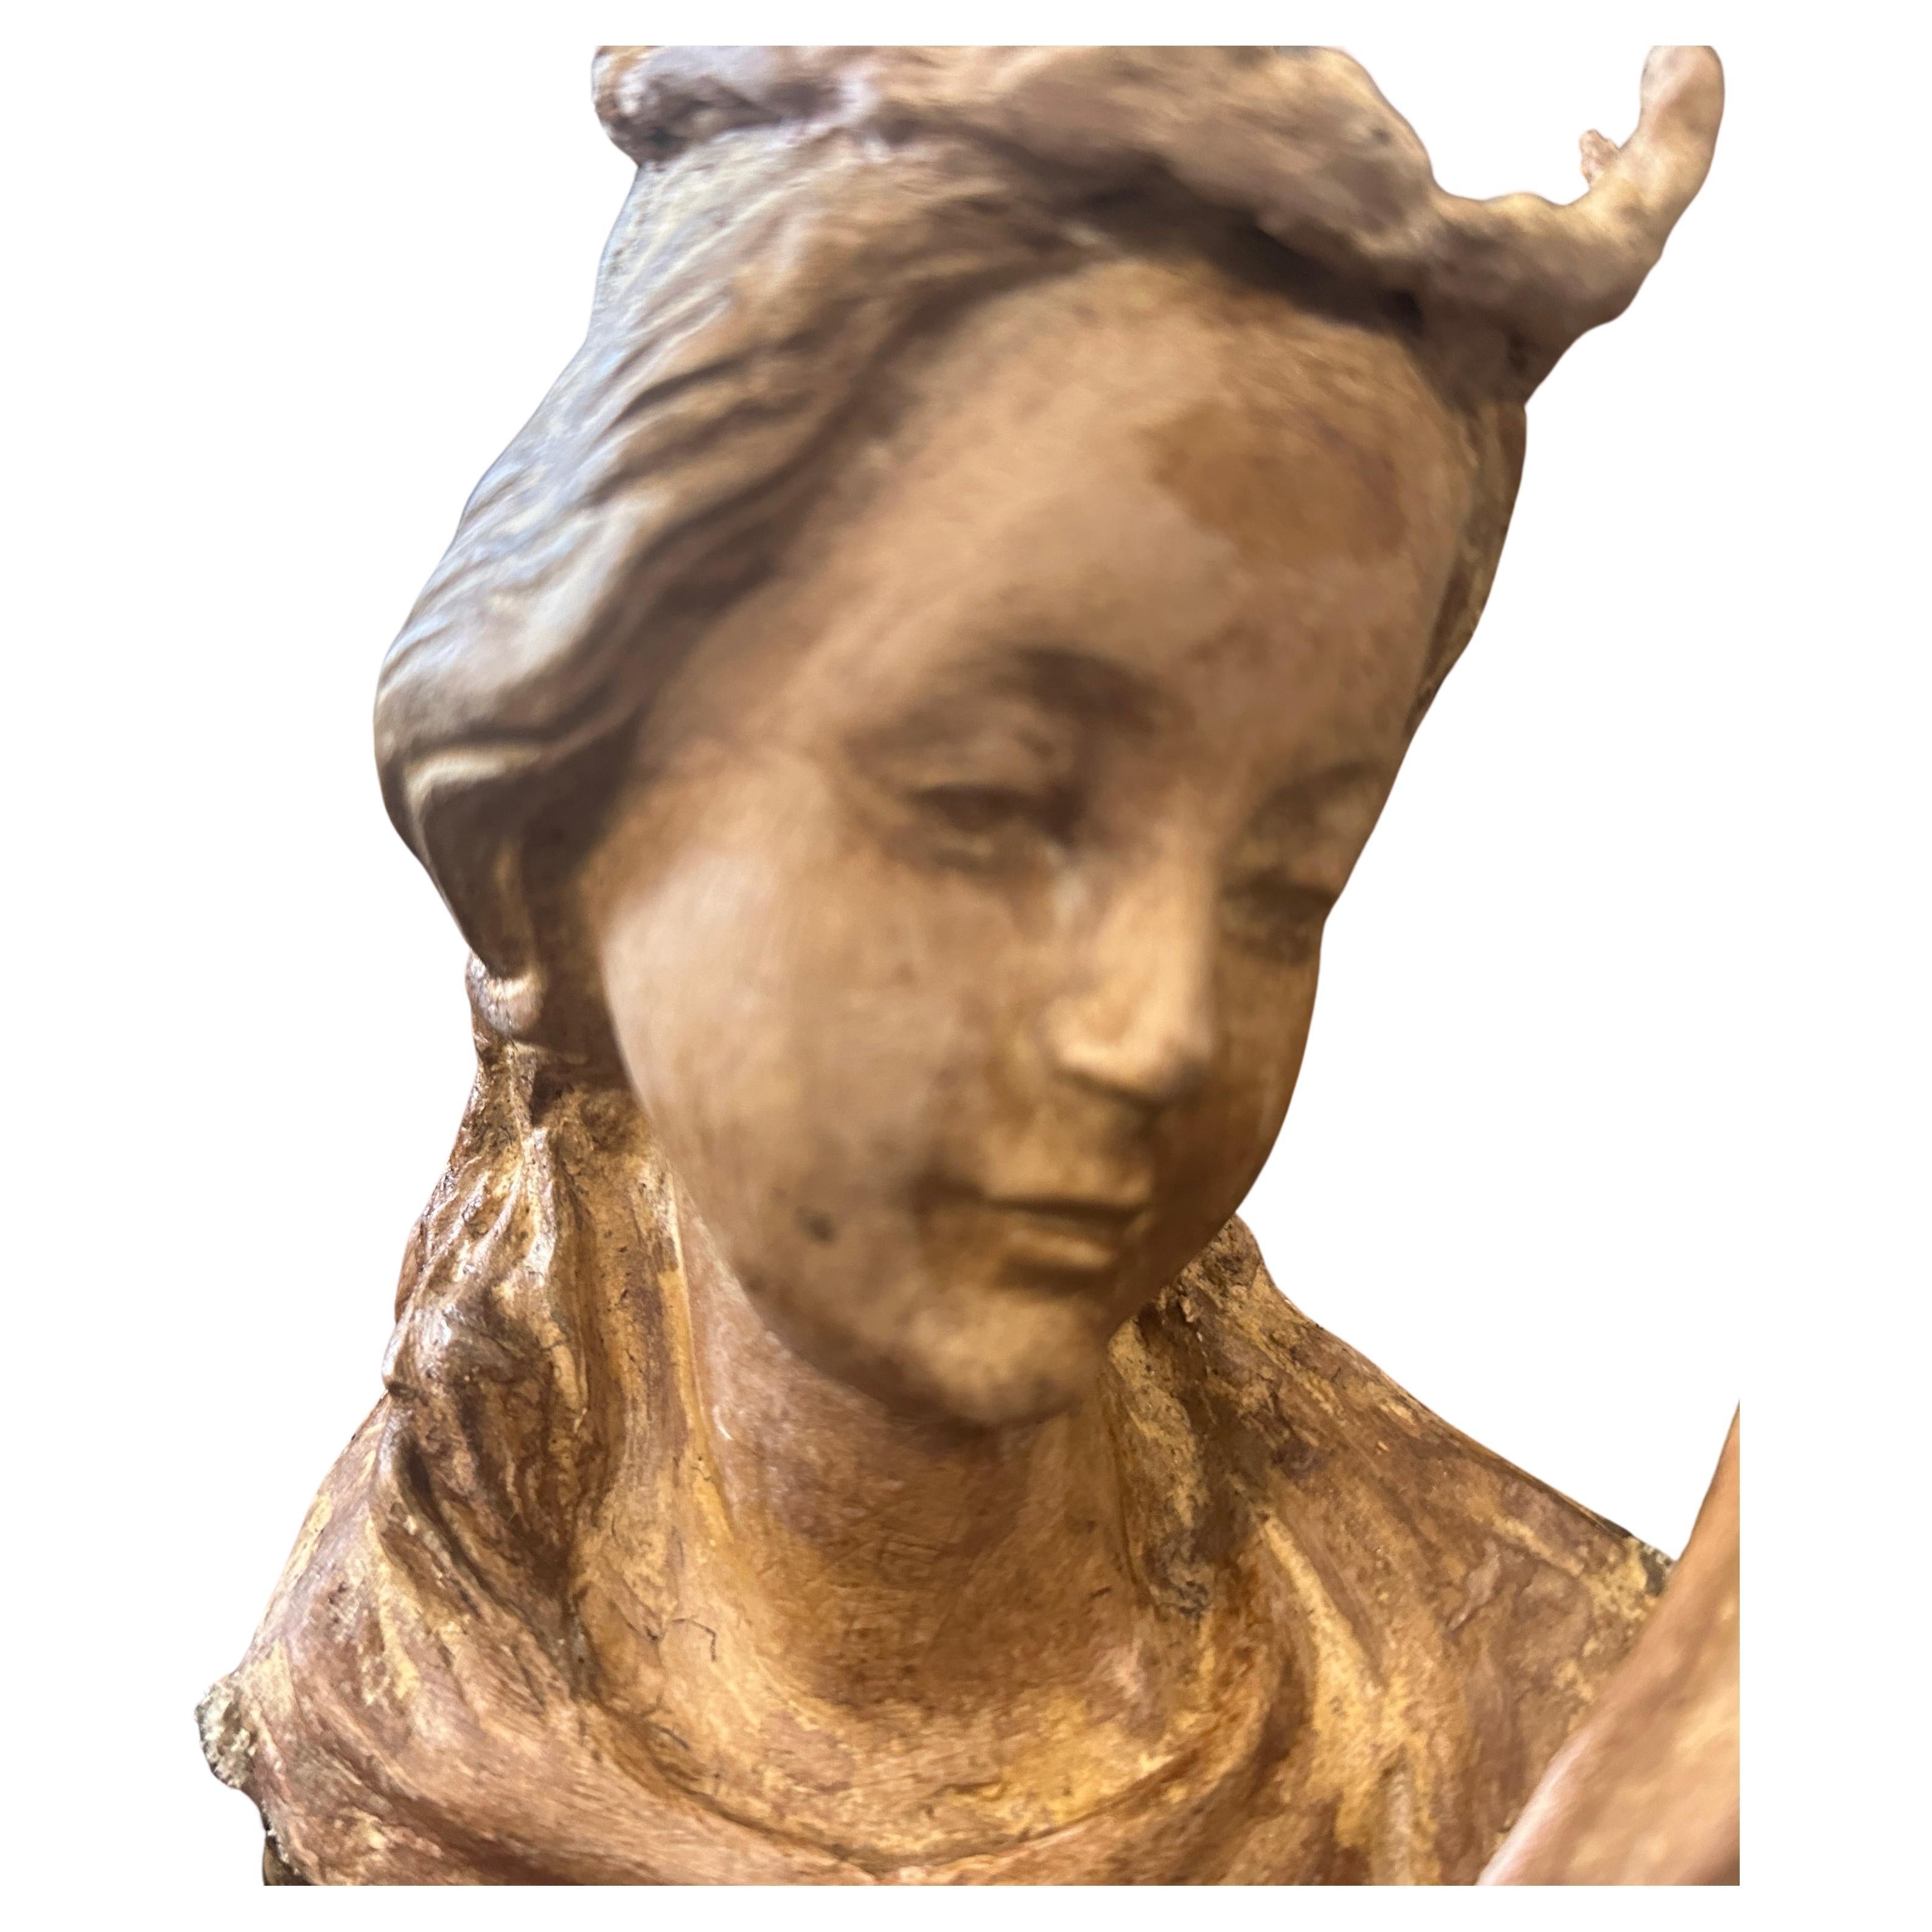 A papier mâché sculpture of Saint Agata hand-crafted in Sicily in the first half of 20th century, the item is mounted on a round glass and wood display case. St. Agata is a prominent figure in Sicilian religious tradition. Understanding the